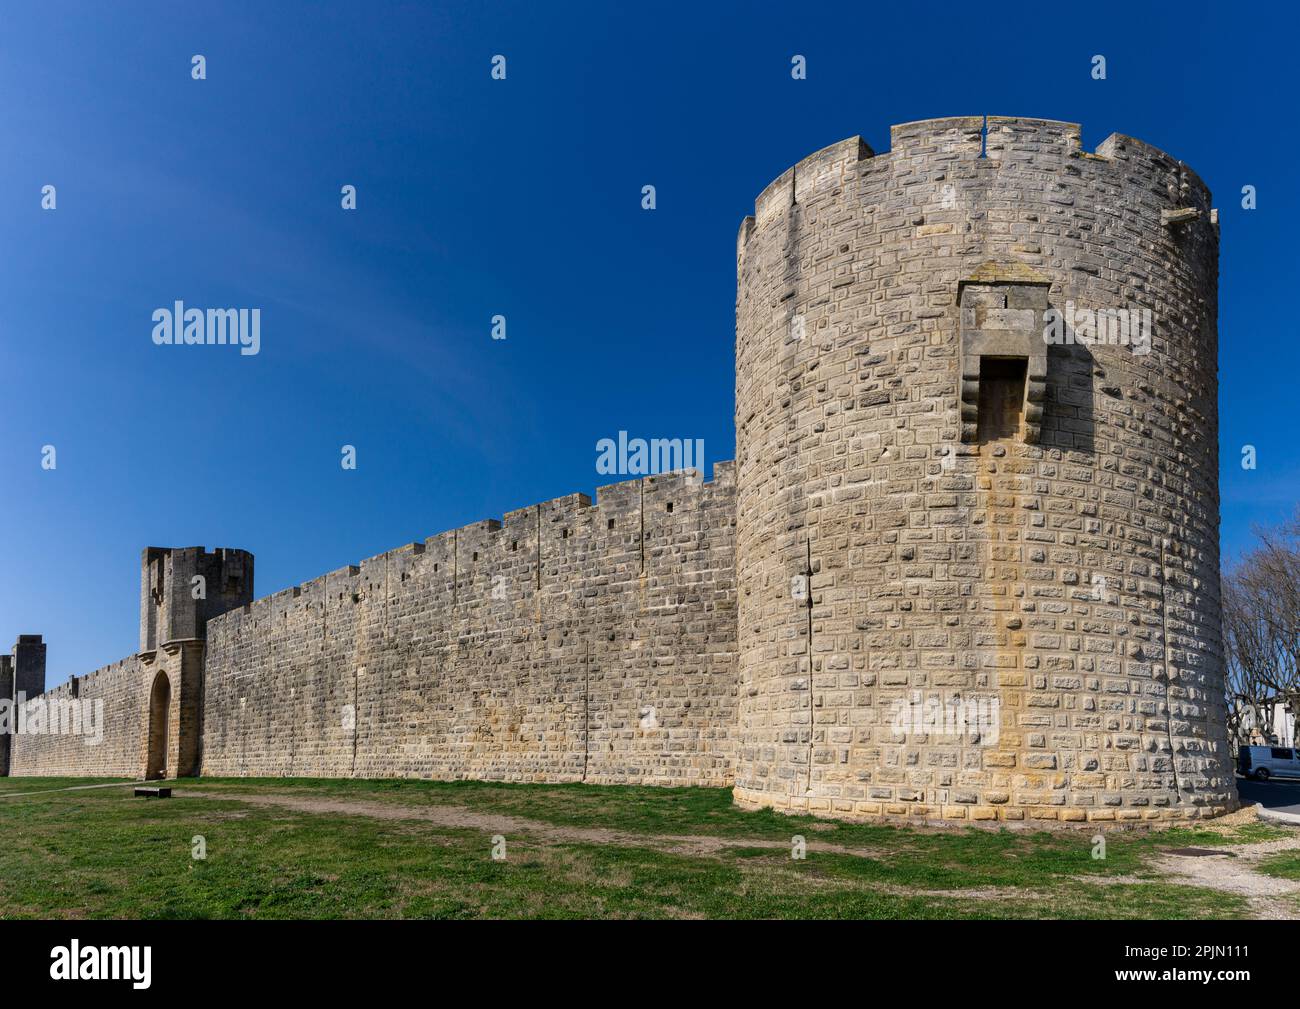 A view of the historic city walls surrounding the Camargue village of Aigues-Mortes Stock Photo